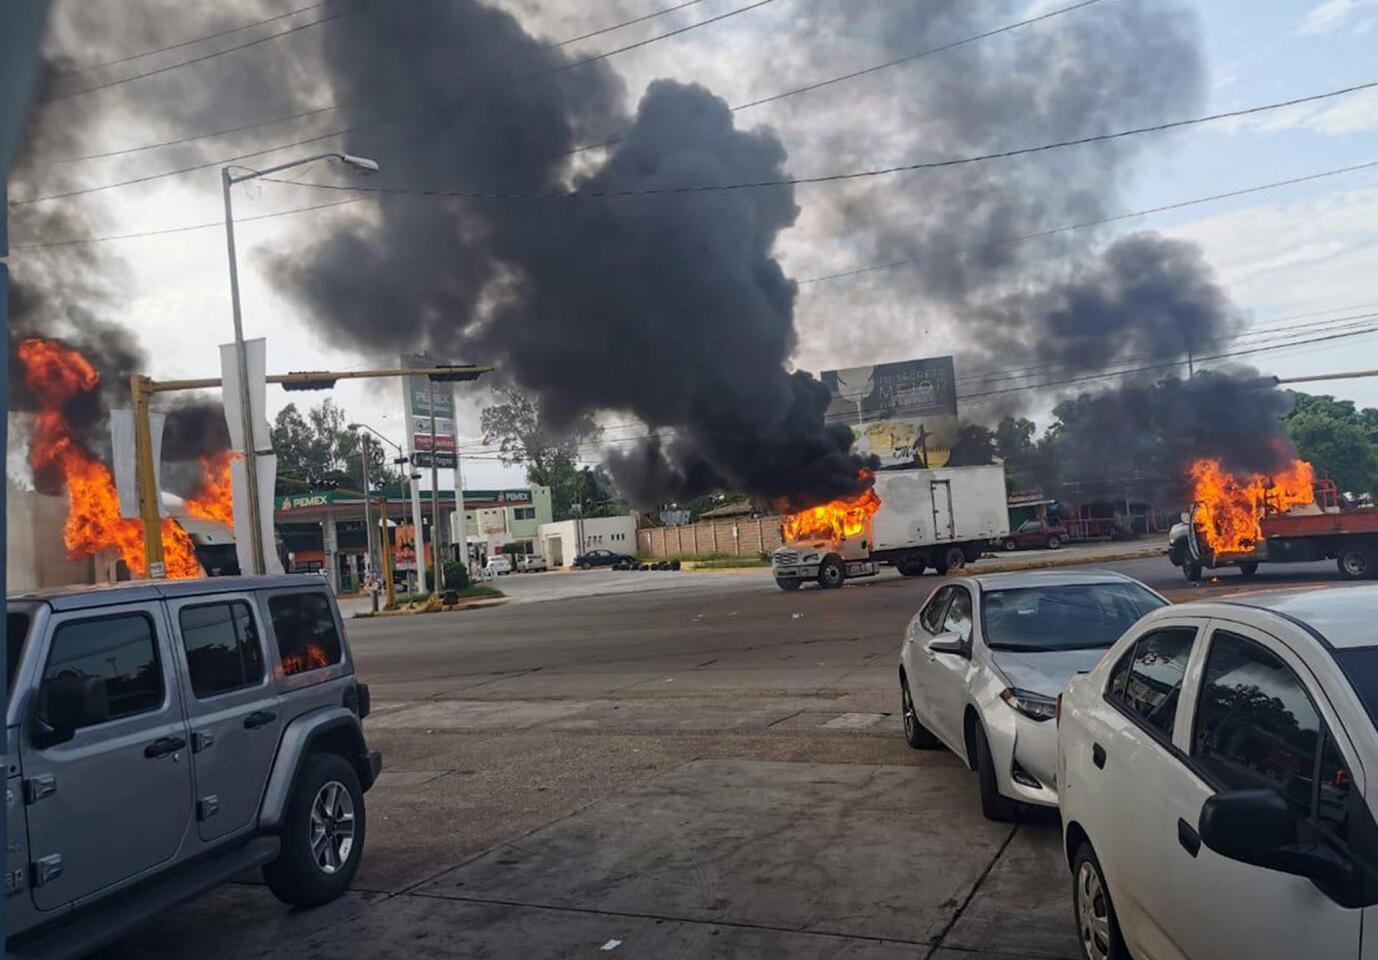 Mandatory Credit: Photo by STR/EPA-EFE/REX (10449104a) A view of vehicles on fire during a clash between armed gunmen and Federal police and military soldiers, in the streets of the city of Culiacan, Sinaloa state, Mexico, 17 October 2019. According to media reports, alleged drug cartel gunmen set up blockades and unleashed volleys of gunfire in the Mexican city of Culiacan amid rumors of the capture of Ovidio Guzman Lopez, son of imprisoned drug trafficker Joaquin 'El Chapo' Guzman Loera. The blockades set up by the gunmen, presumably from the Sinaloa drug cartel, extended to the exits of the city. Attempted capture of Ovidio Guzman Lopez sparks gunbattle in Culiacan, Mexico - 17 Oct 2019 ** Usable by LA, CT and MoD ONLY **